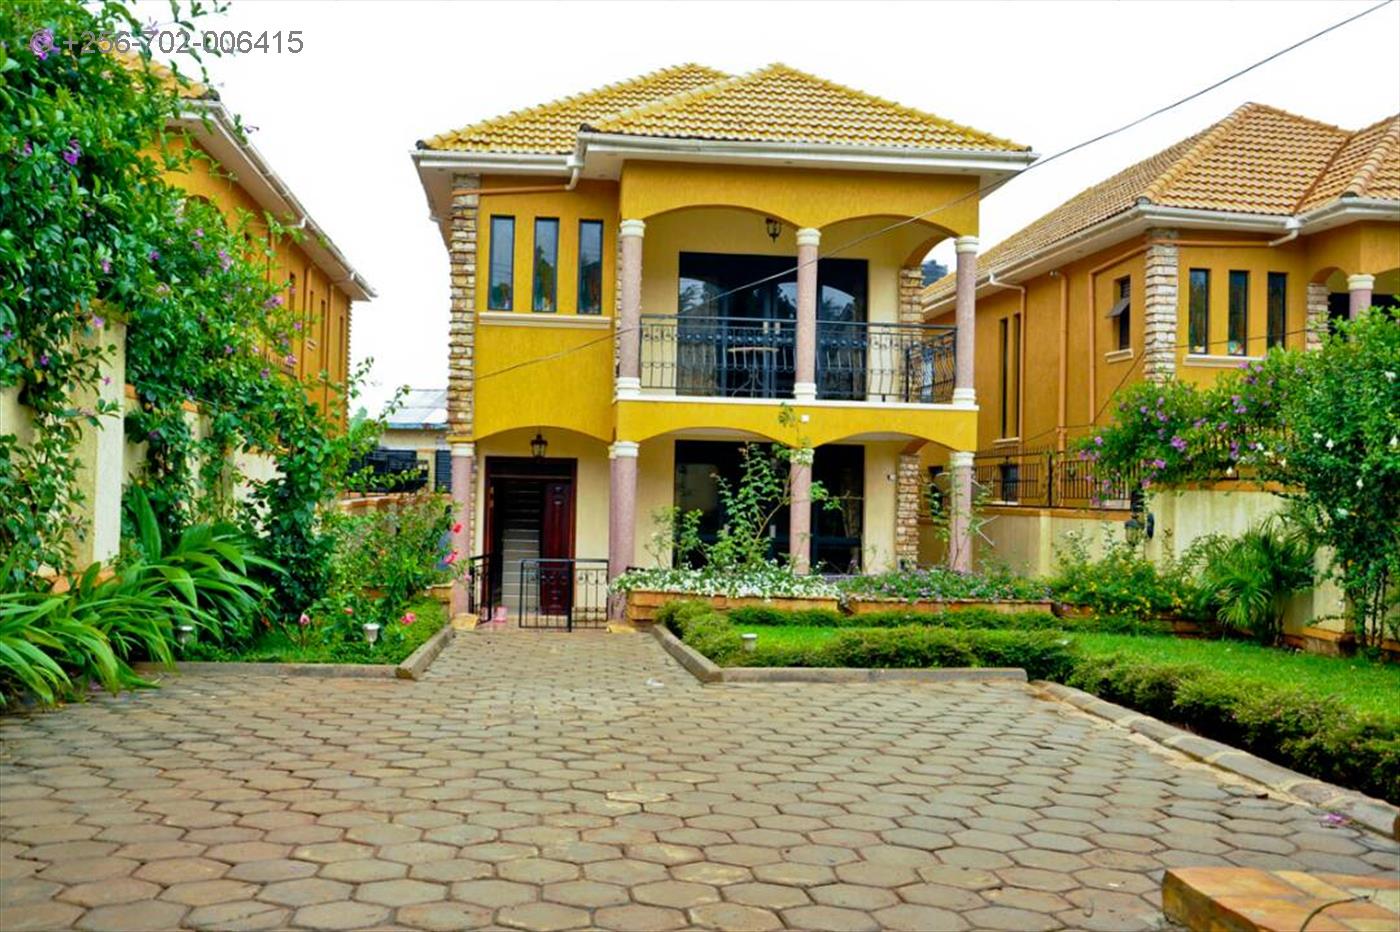 Mansion for sale in Luzira Wakiso